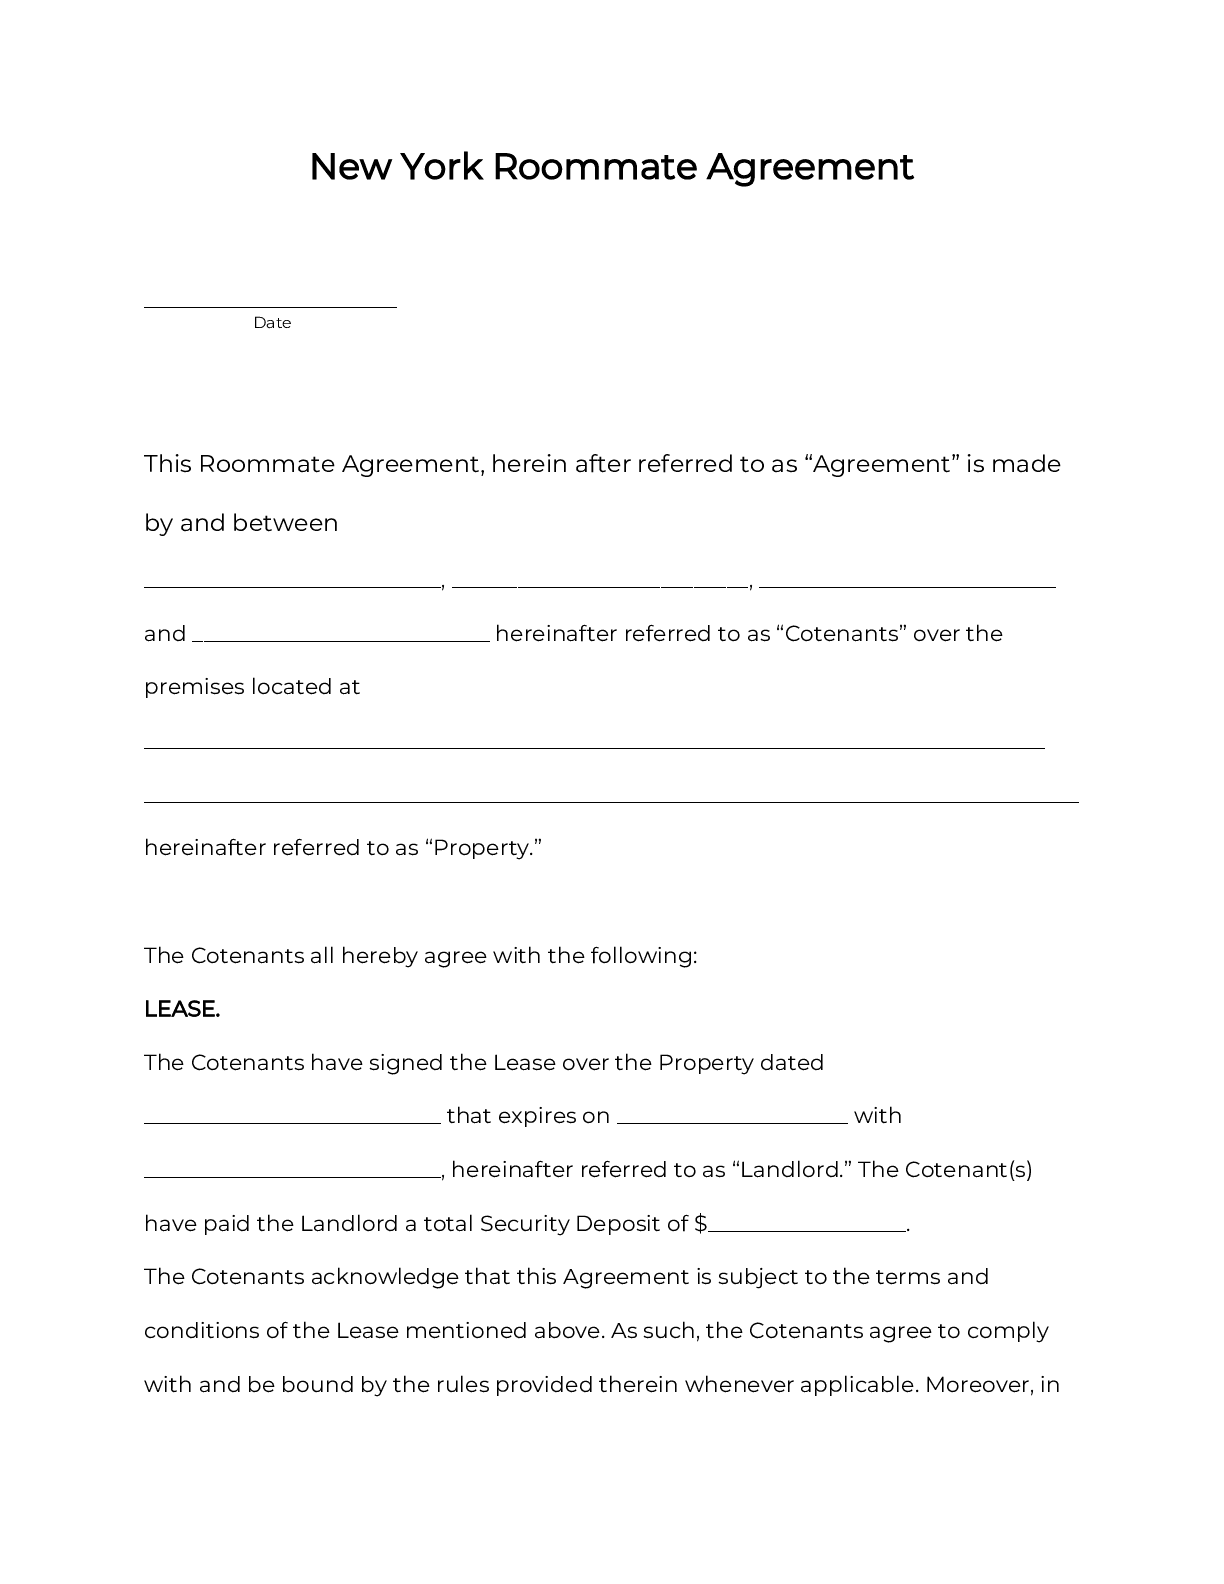 OFFICIAL New York Room Rental Agreement Roommate Form [2021] PDF